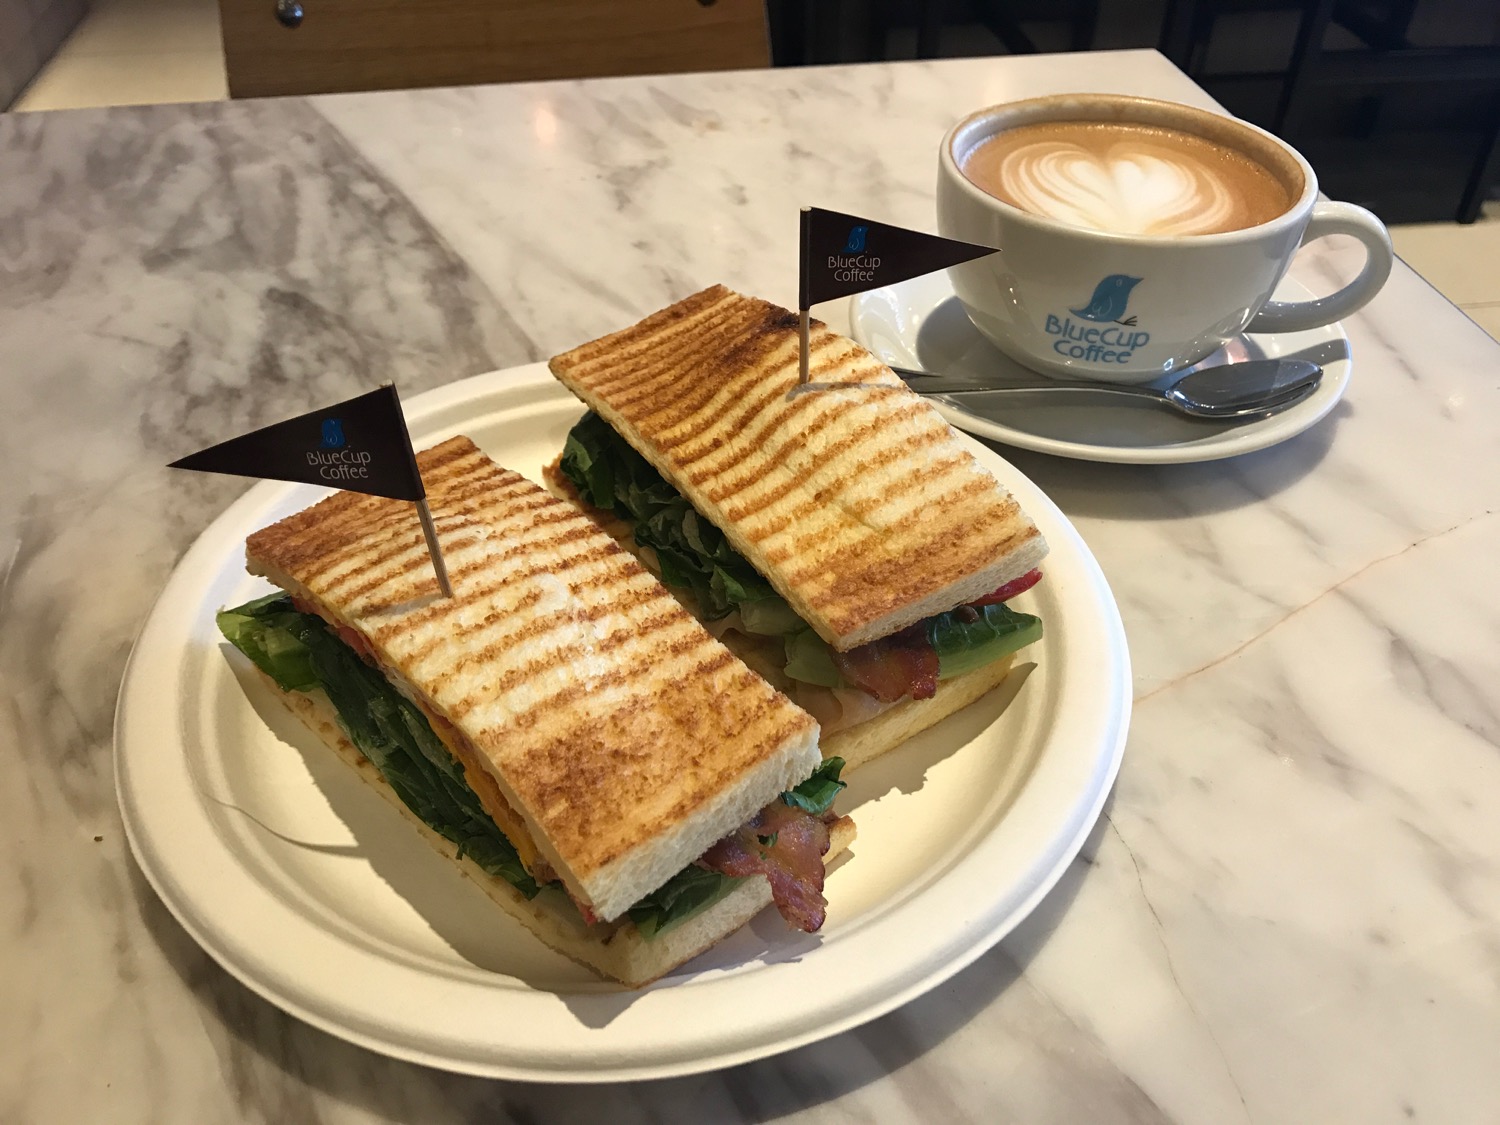 a plate of sandwiches and a cup of coffee